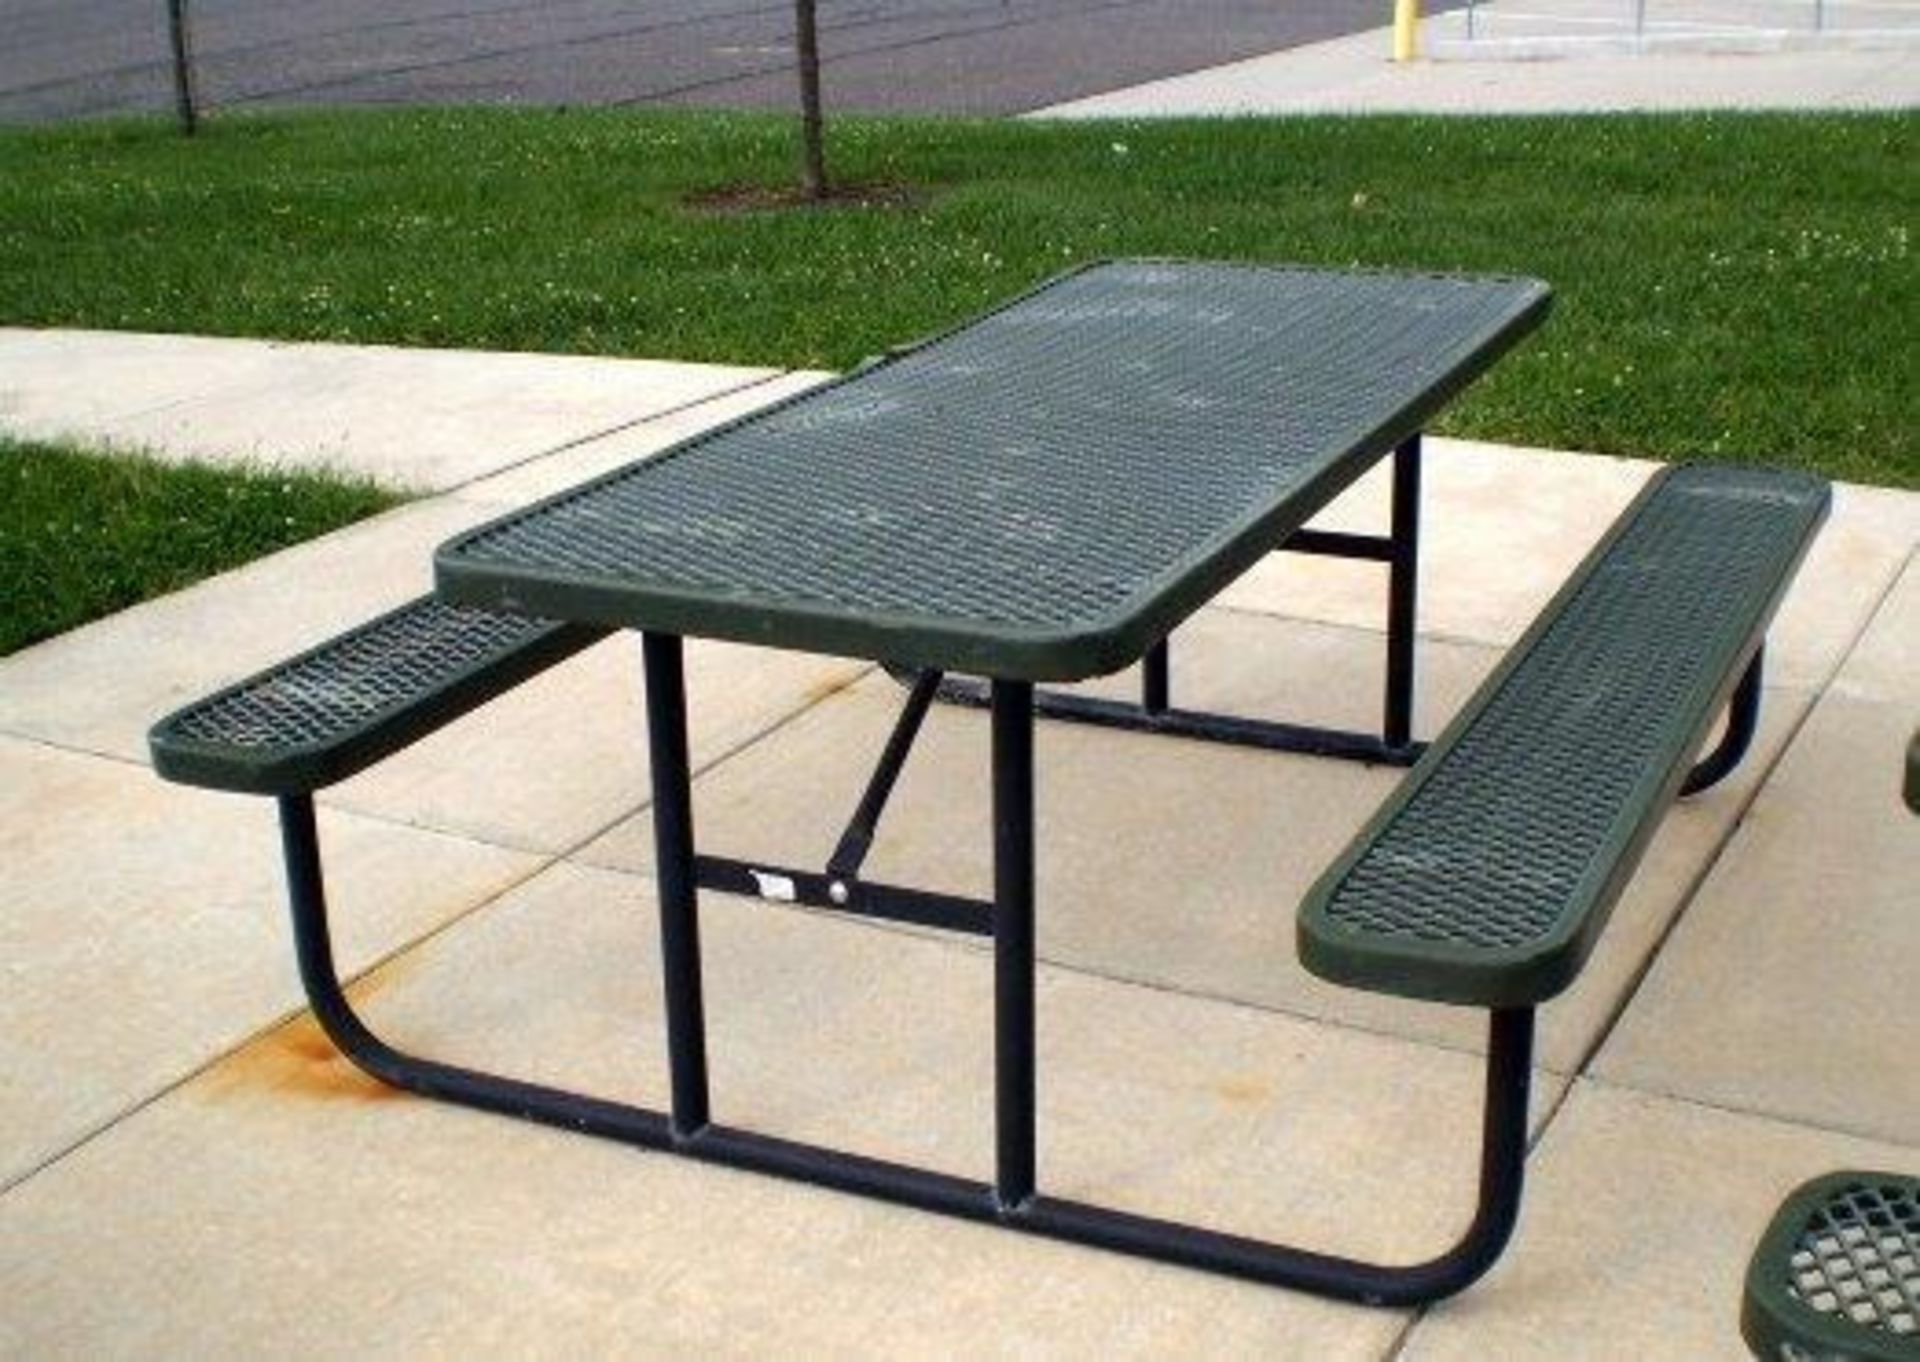 6 Ft Plastic coated Top Picnic Tables - Image 2 of 2